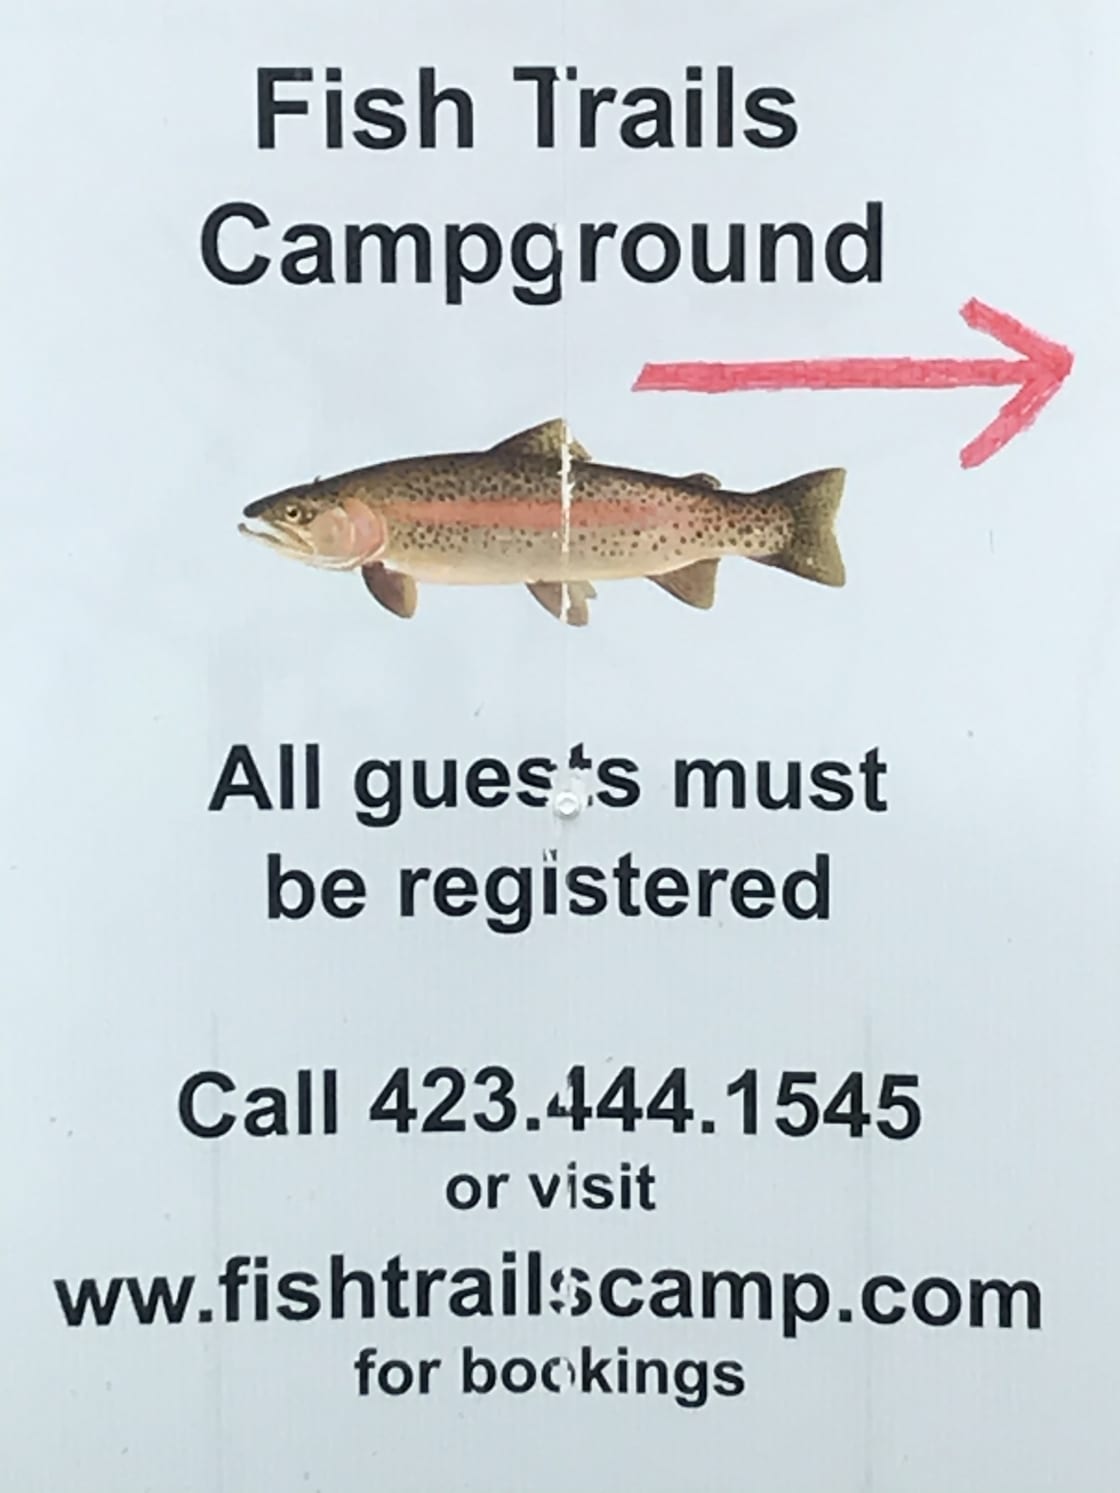 This is the campground entrance sign We have down By the gaurd rail before you cross the bridge coming into the property directly off of Highway 91